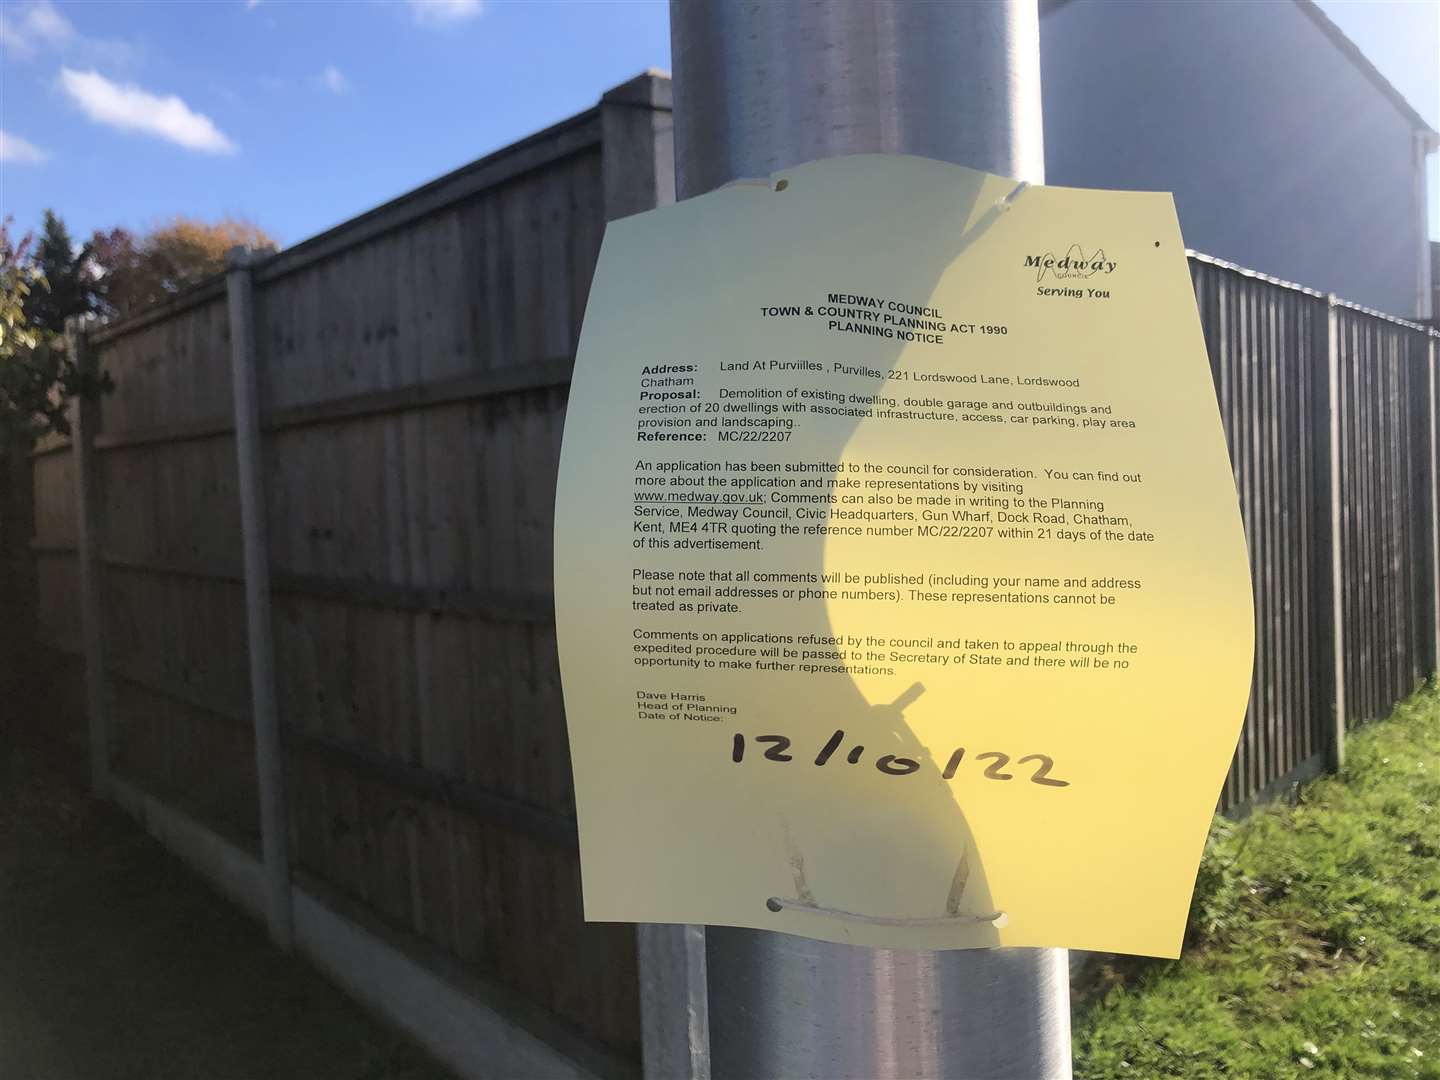 Planning notice in Setford Road asking for residents' views